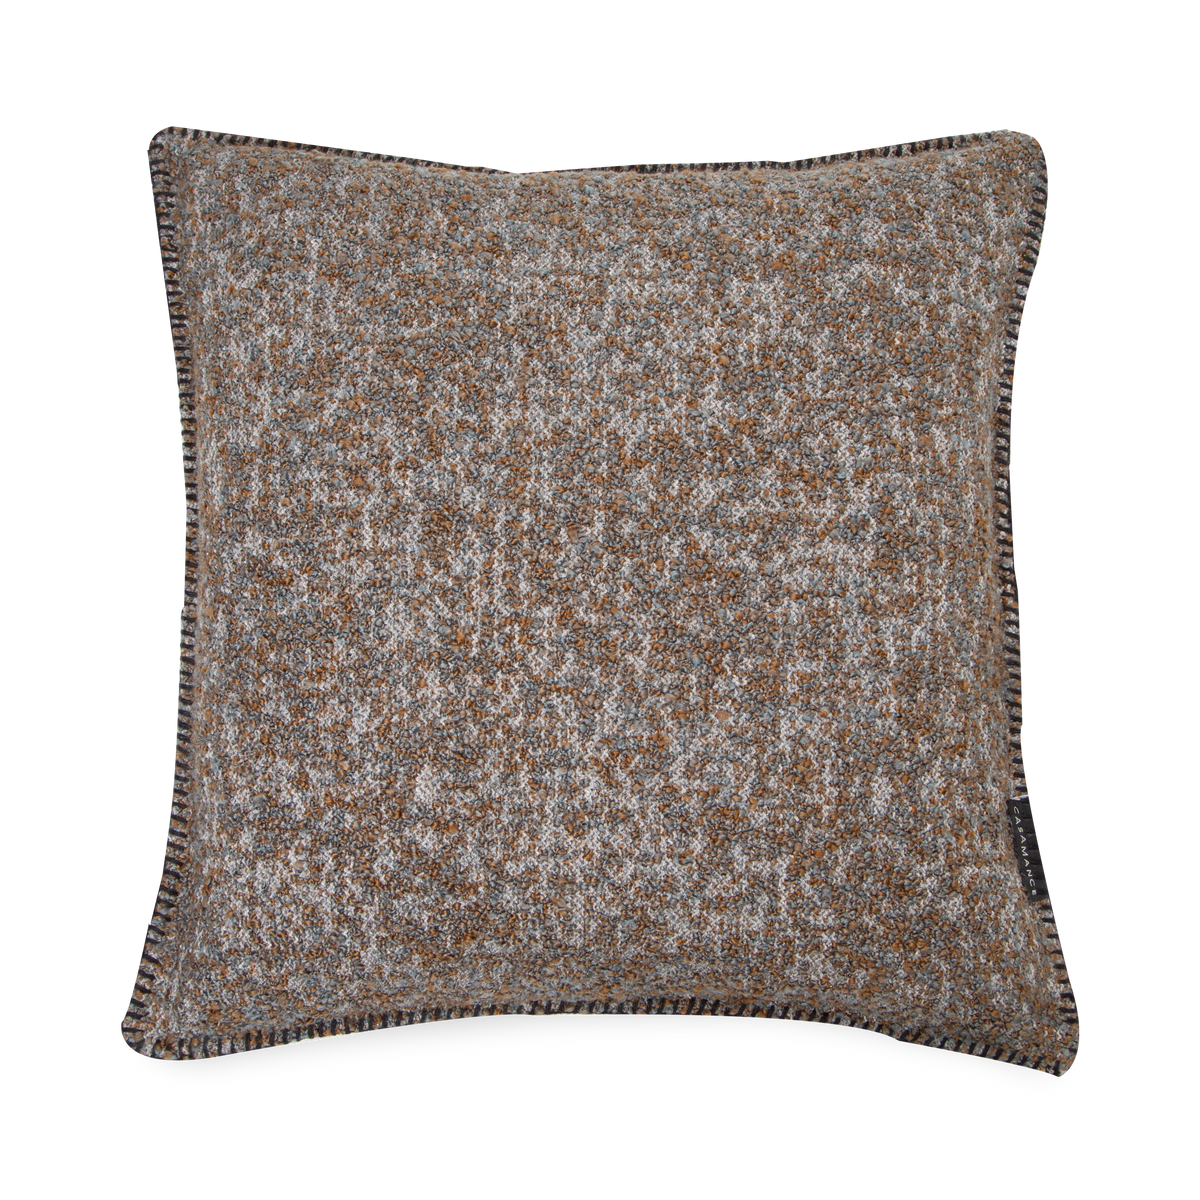 A pillow that is perfect for those who value the visual impact and physicality of textures, the Boucle Pillow is woven with mix of blue, brown and white to create a dynamic yet uni